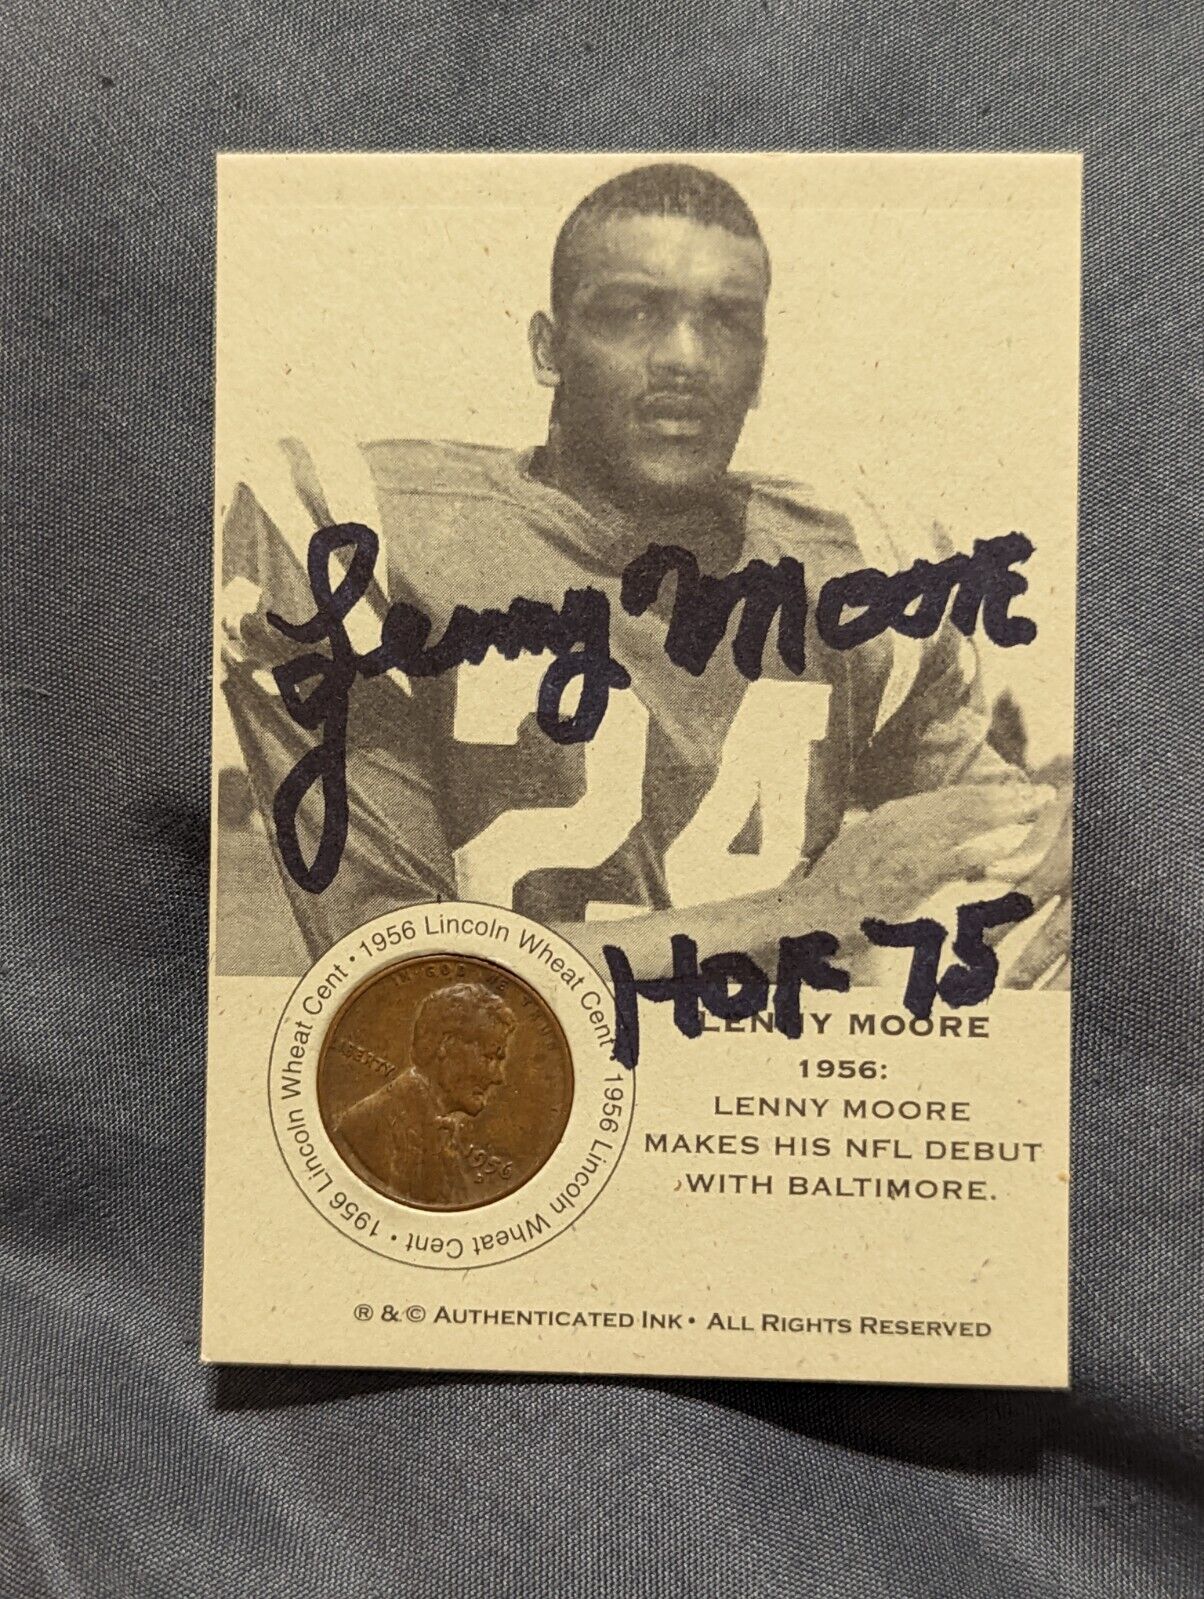 Lenny Moore Baltimore Colts Autograph Signed Card NFL Debut R & C Authenticated 